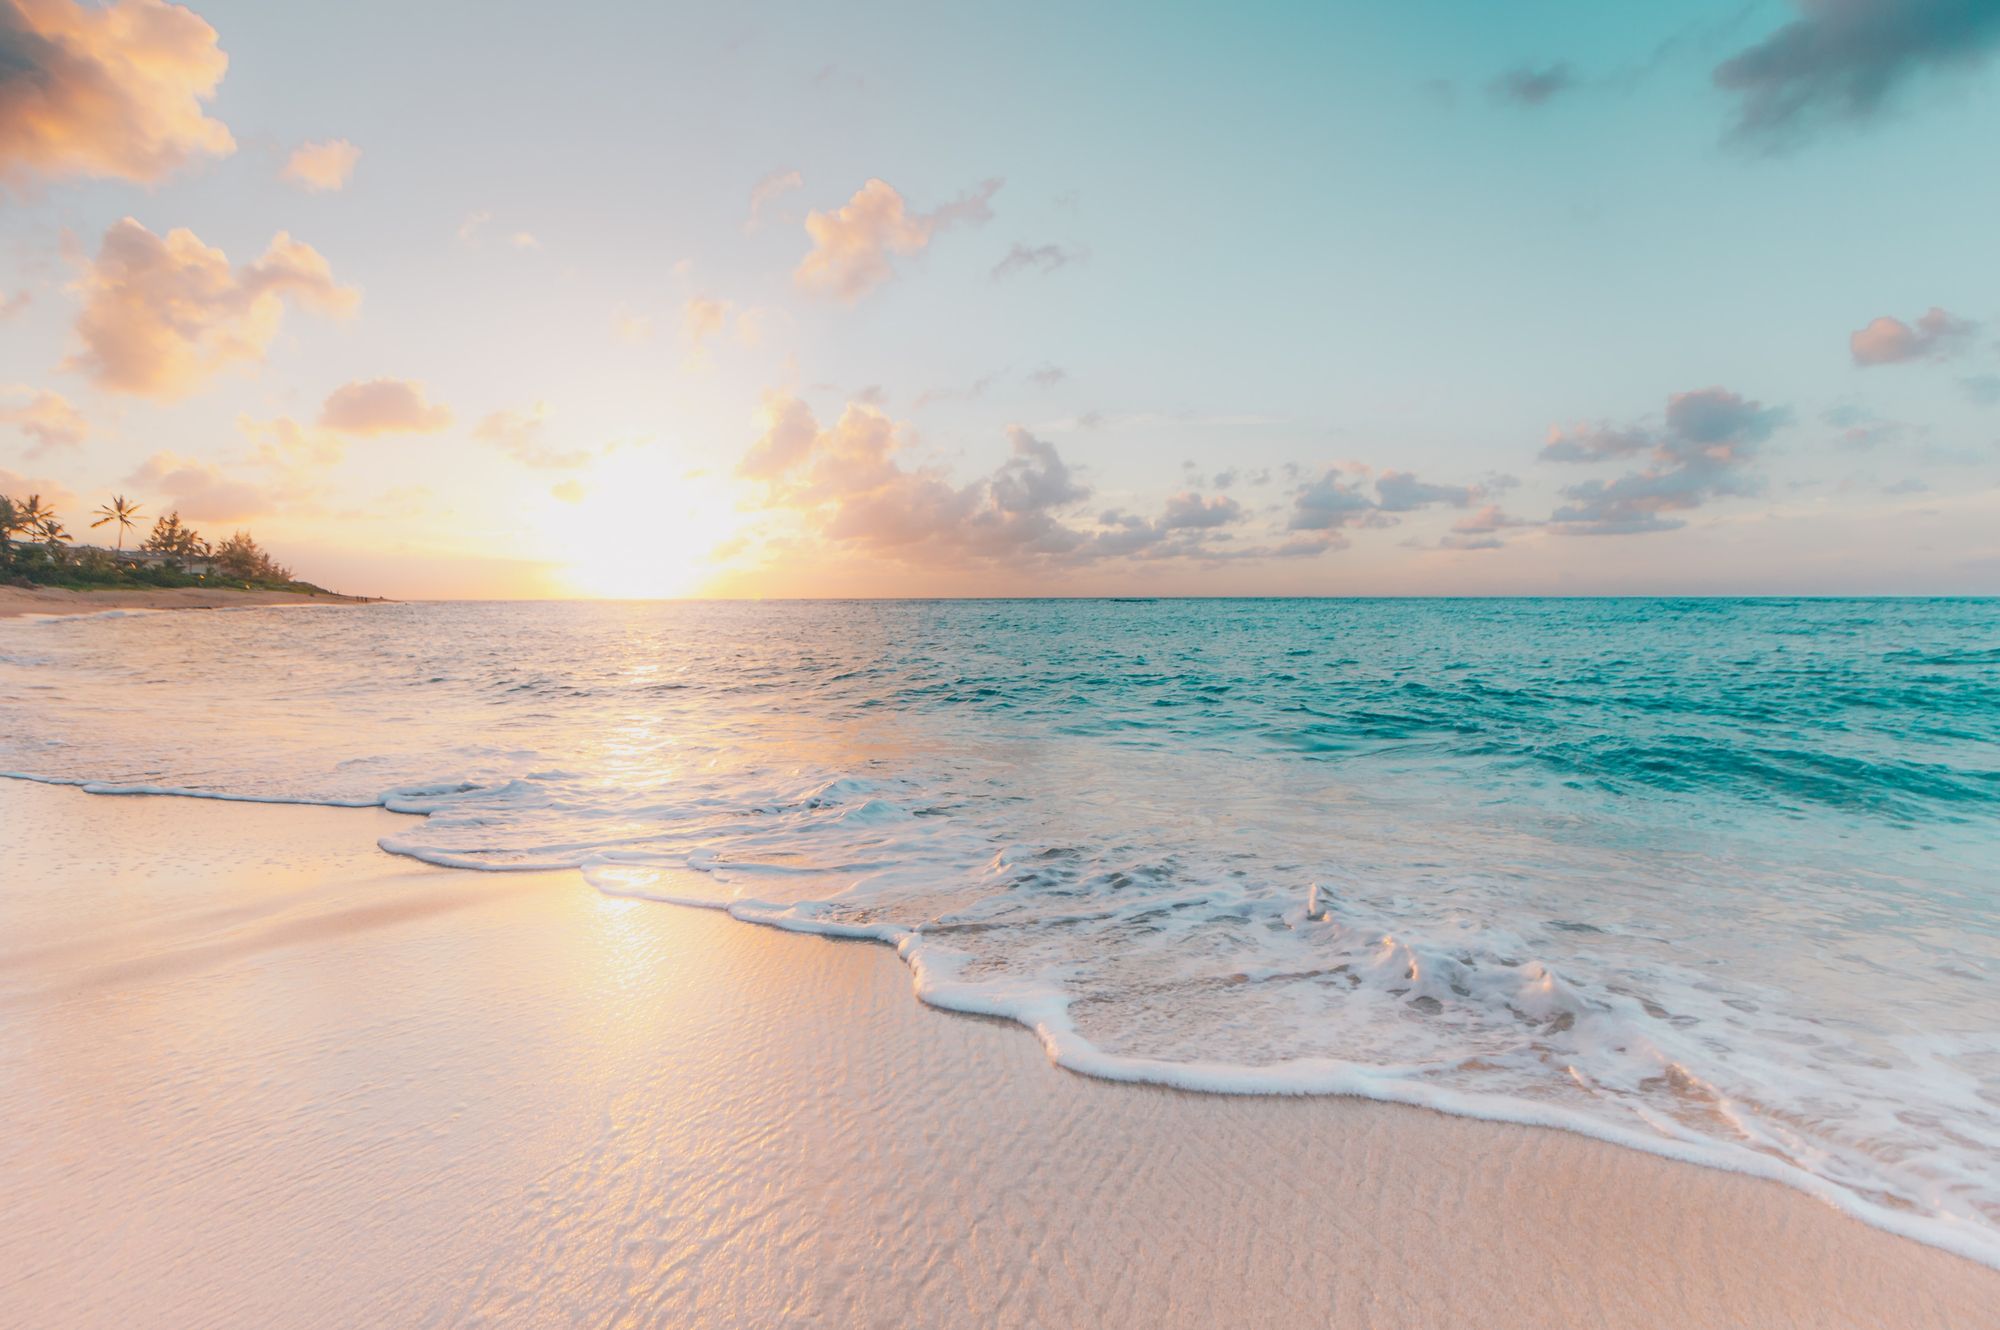 Beach with white sand and brilliant blue water, with bright sunrise in background with a few clouds